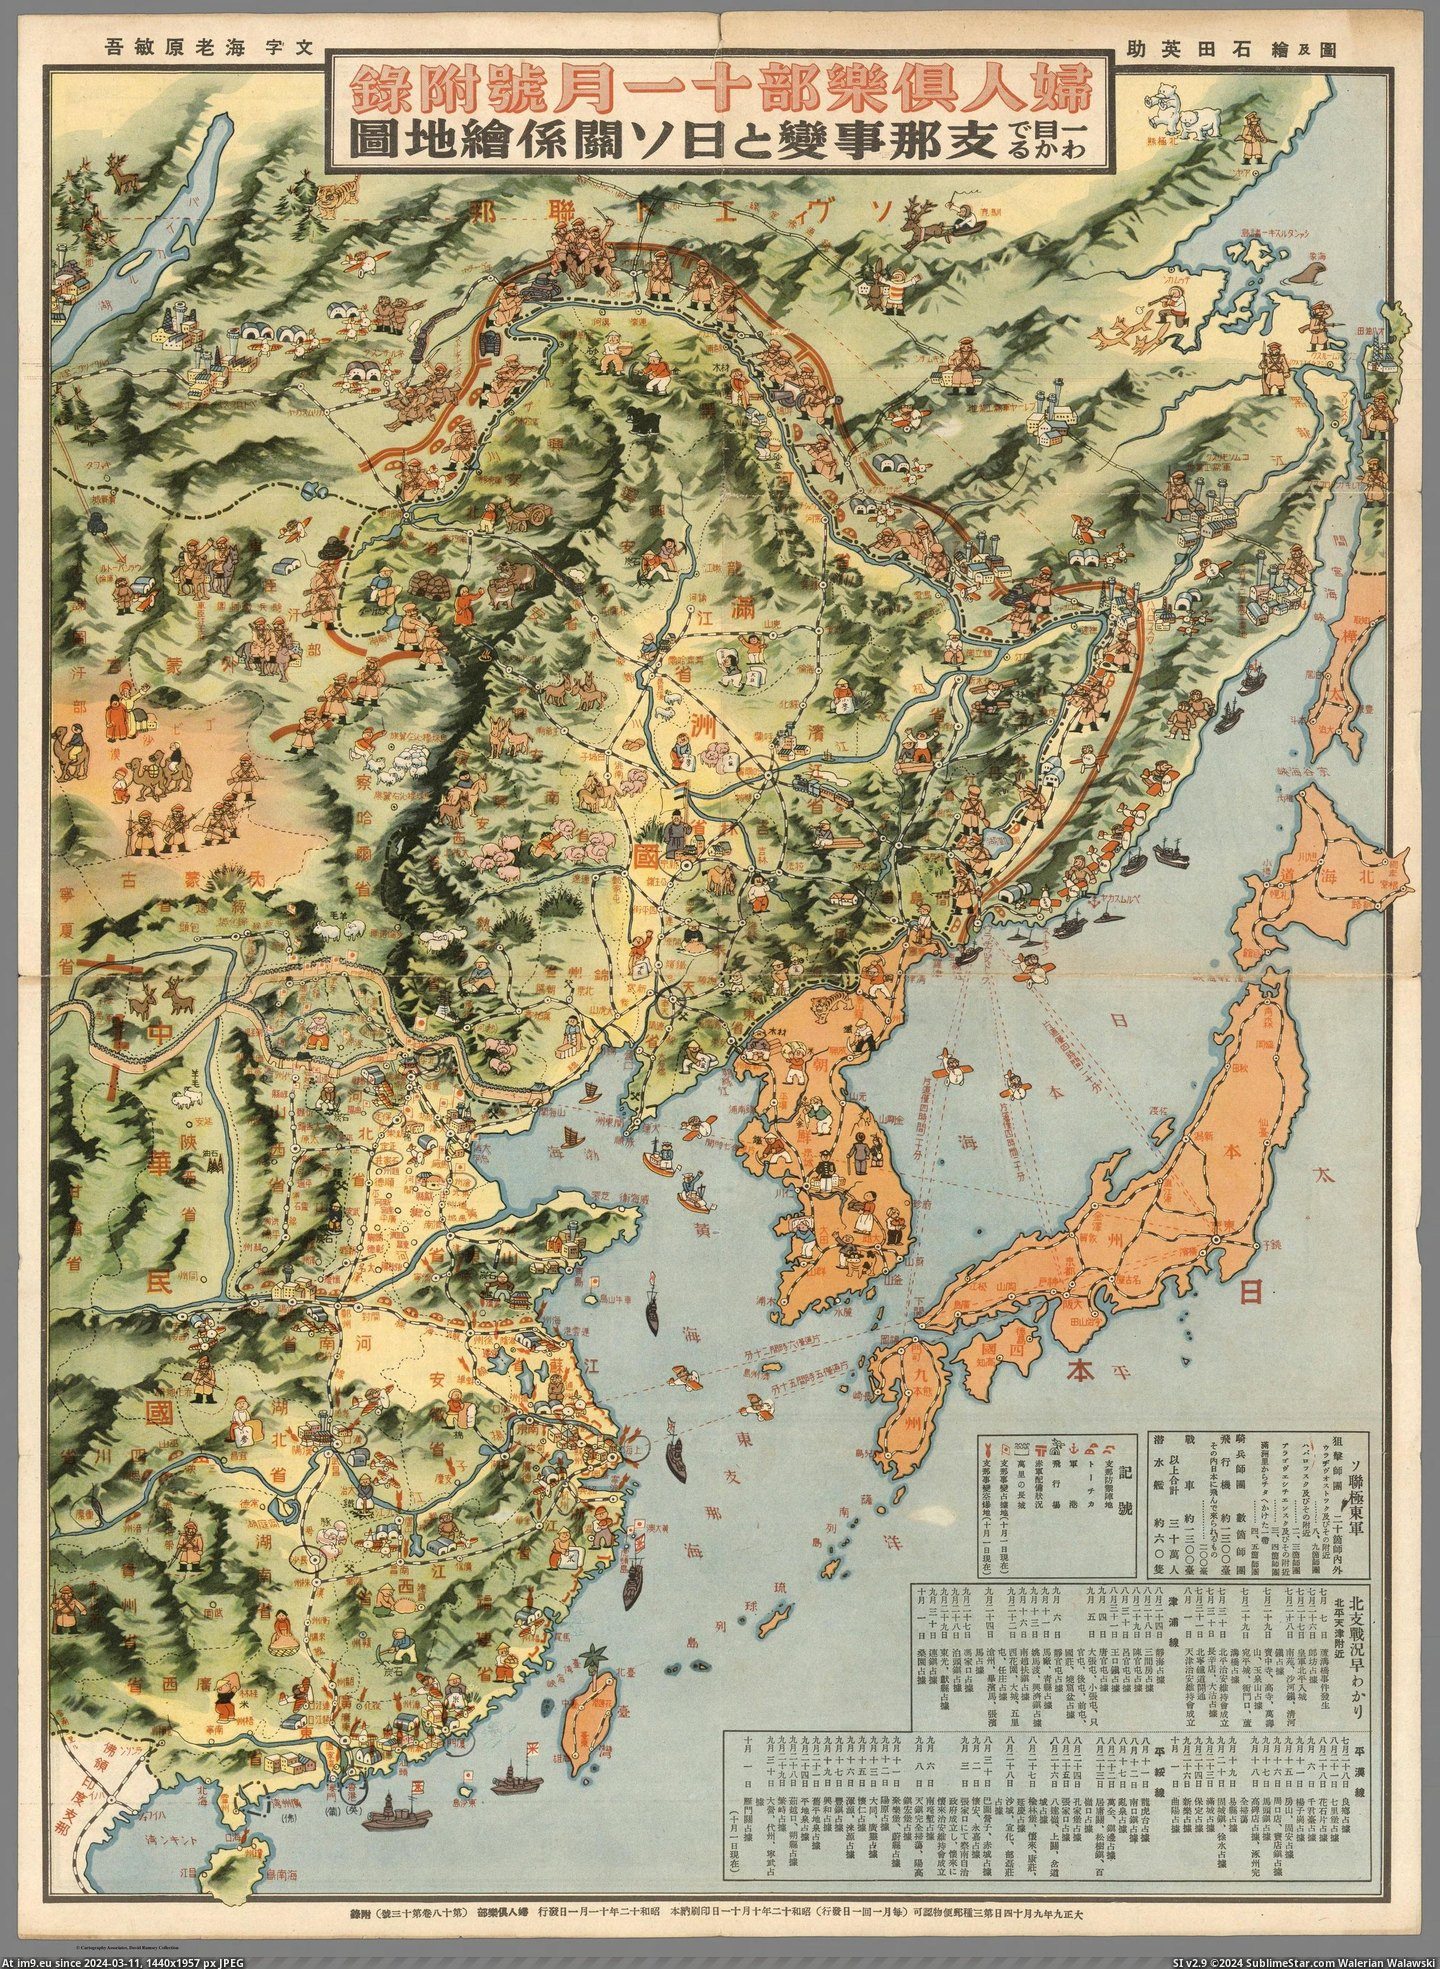 #Japanese #Map #Soviet #Relations #Japan #China [Mapporn] Japanese Pictorial map of China and Japan-Soviet relations. (1937) [2704x3686] Pic. (Image of album My r/MAPS favs))